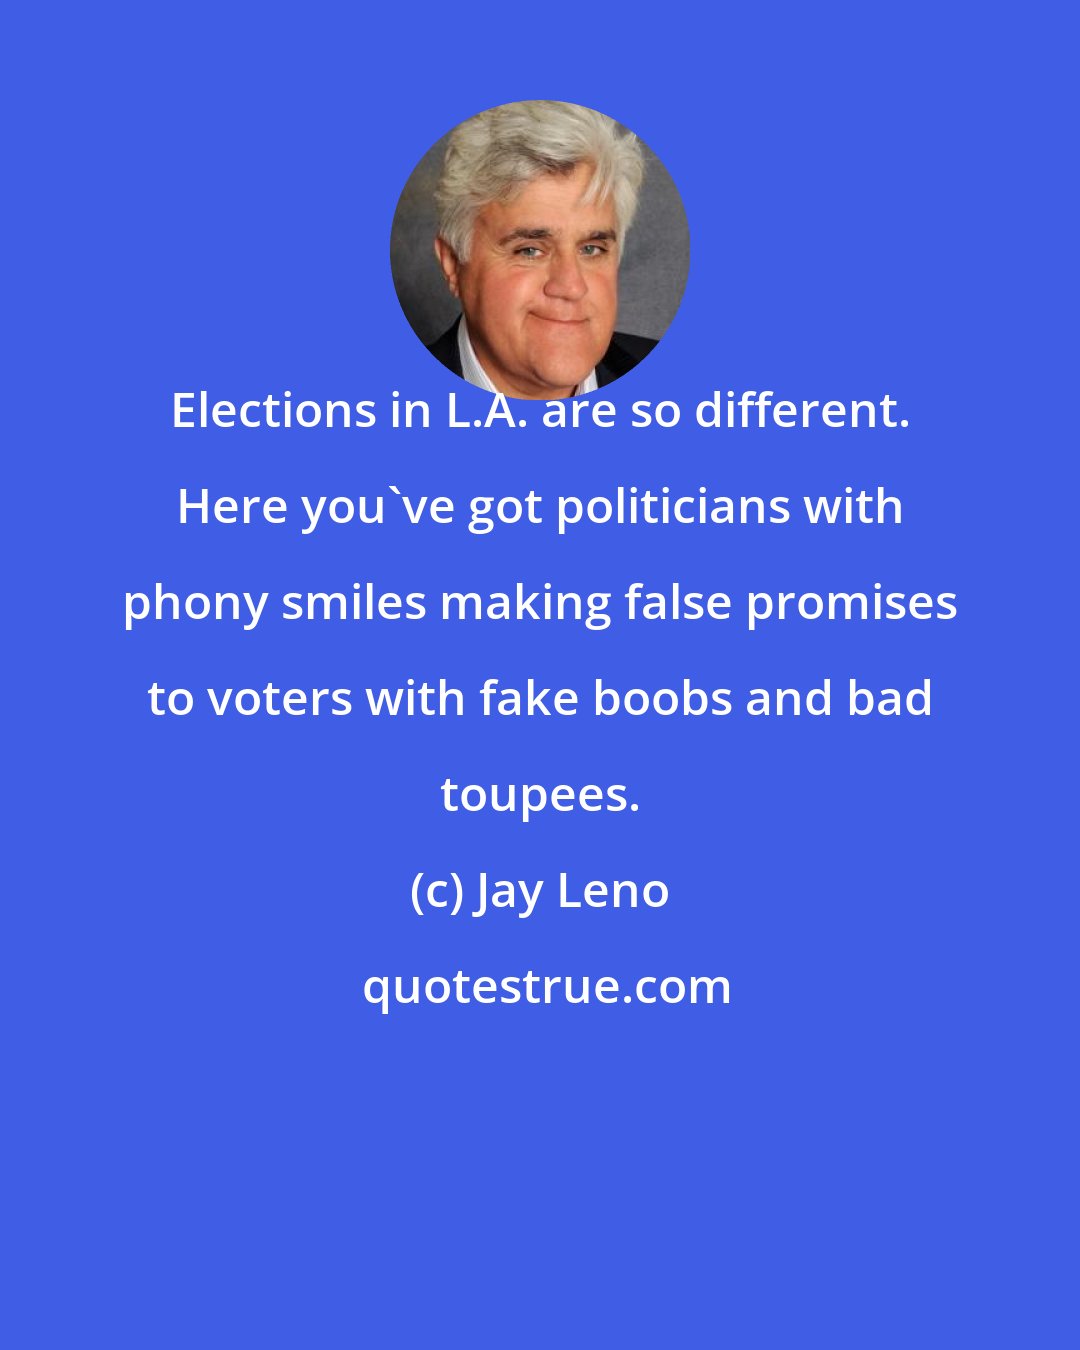 Jay Leno: Elections in L.A. are so different. Here you've got politicians with phony smiles making false promises to voters with fake boobs and bad toupees.